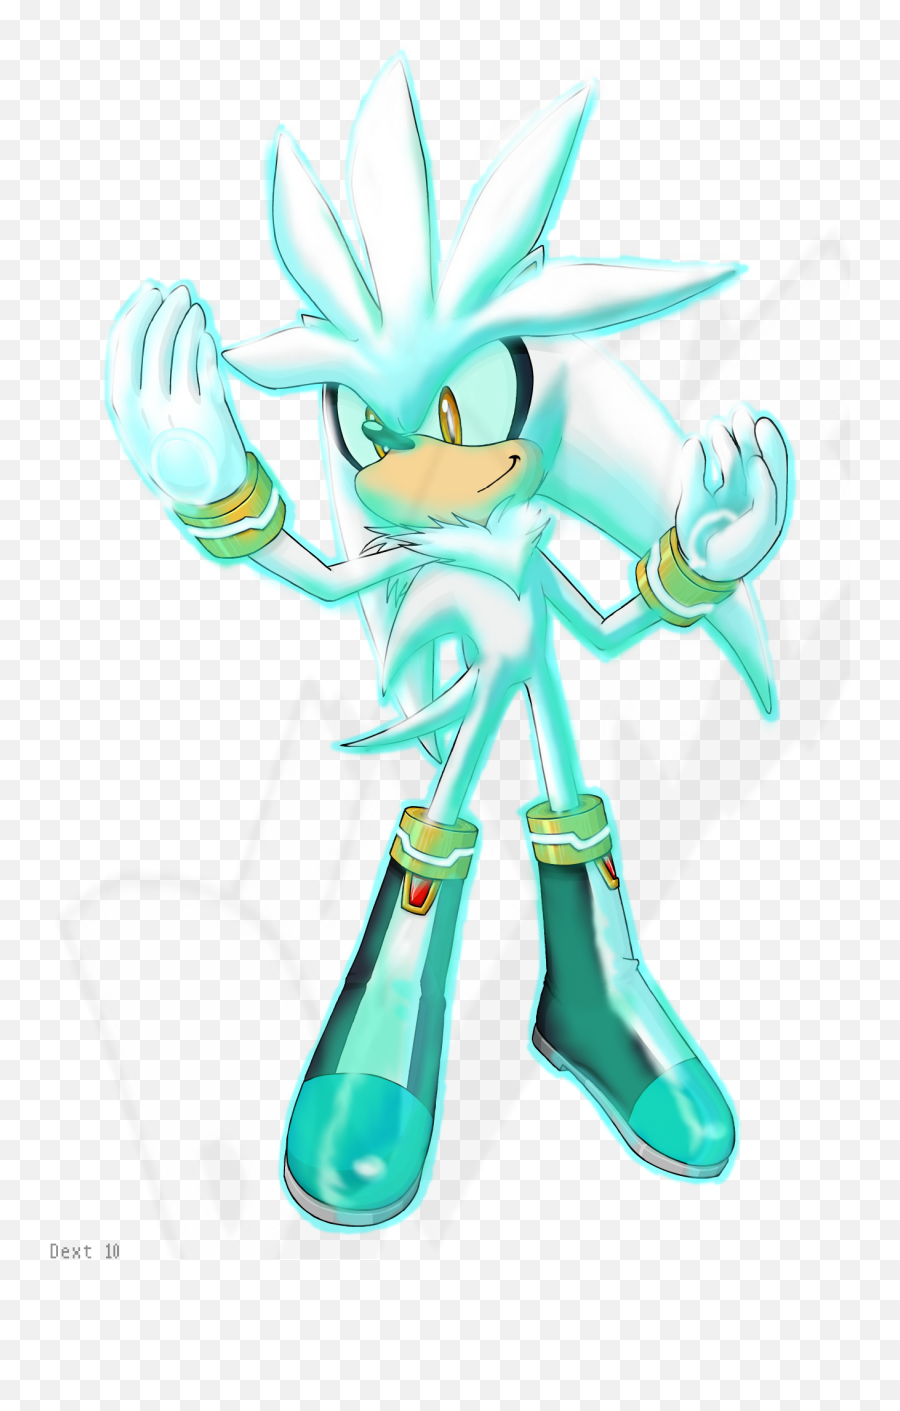 Download Silver The Hedgehog Images - Siver The Hedchog Png,Silver The Hedgehog Png